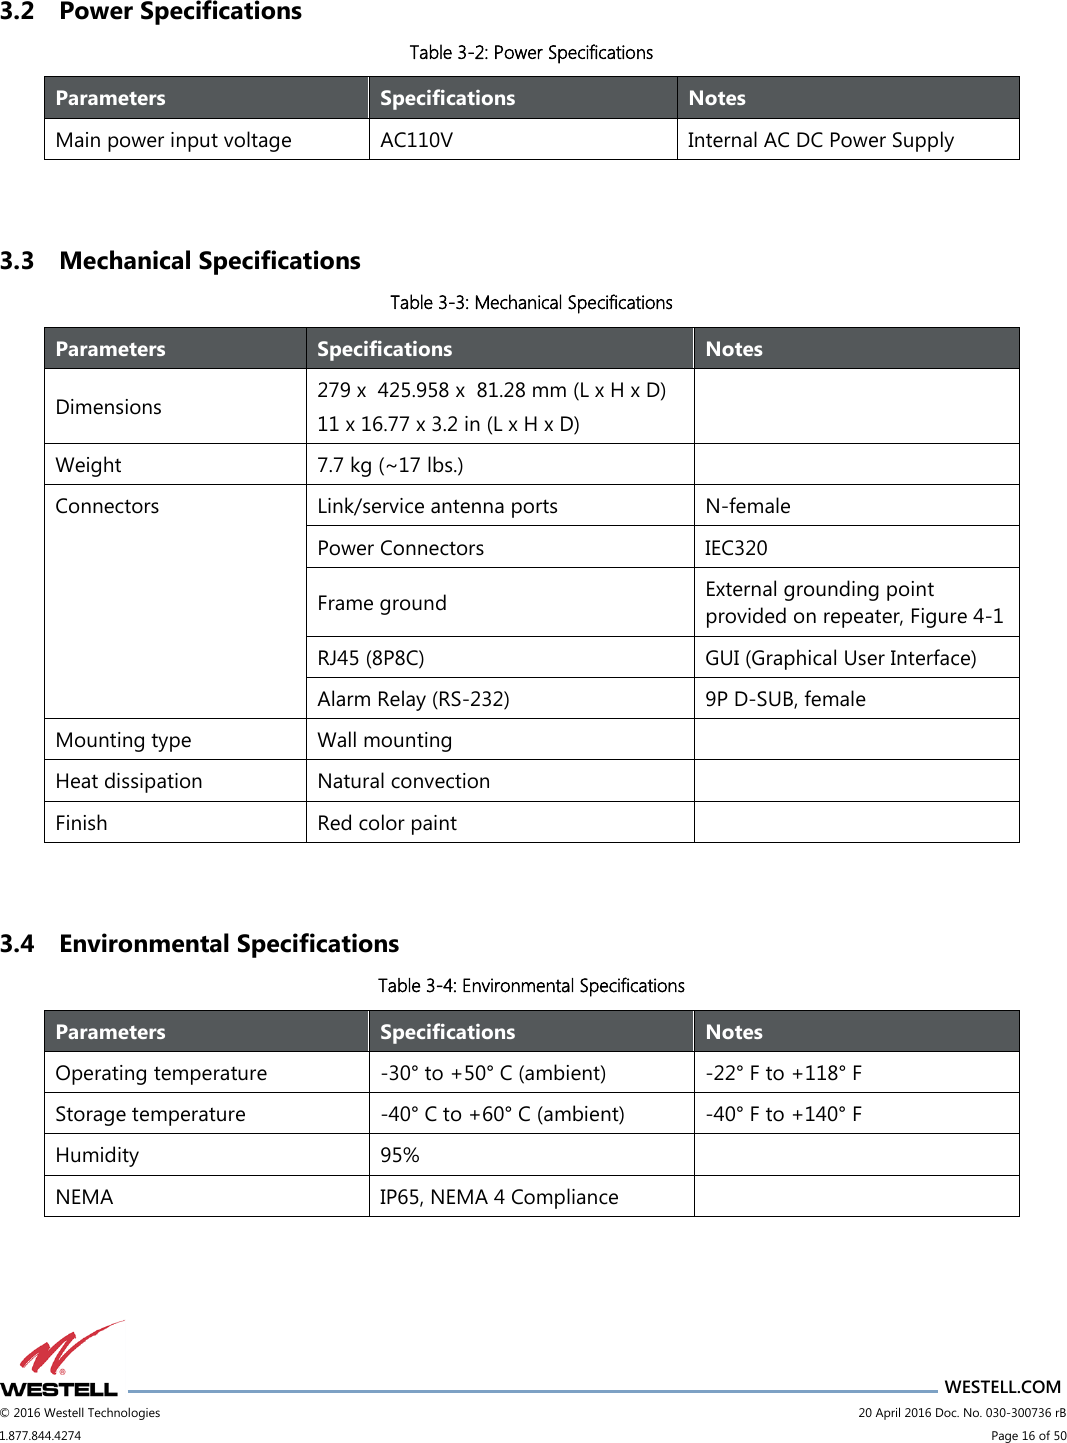                      WESTELL.COM © 2016 Westell Technologies                             20 April 2016 Doc. No. 030-300736 rB 1.877.844.4274                             Page 16 of 50  3.2 Power Specifications Table 3-2: Power Specifications  3.3 Mechanical Specifications Table 3-3: Mechanical Specifications  3.4 Environmental Specifications Table 3-4: Environmental Specifications Parameters Specifications Notes Main power input voltage AC110V Internal AC DC Power Supply Parameters Specifications Notes Dimensions 279 x  425.958 x  81.28 mm (L x H x D) 11 x 16.77 x 3.2 in (L x H x D)  Weight 7.7 kg (~17 lbs.)  Connectors Link/service antenna ports N-female Power Connectors IEC320 Frame ground External grounding point provided on repeater, Figure 4-1 RJ45 (8P8C) GUI (Graphical User Interface) Alarm Relay (RS-232) 9P D-SUB, female Mounting type Wall mounting   Heat dissipation  Natural convection  Finish Red color paint  Parameters Specifications Notes Operating temperature -30° to +50° C (ambient) -22° F to +118° F Storage temperature -40° C to +60° C (ambient) -40° F to +140° F Humidity 95%  NEMA IP65, NEMA 4 Compliance  